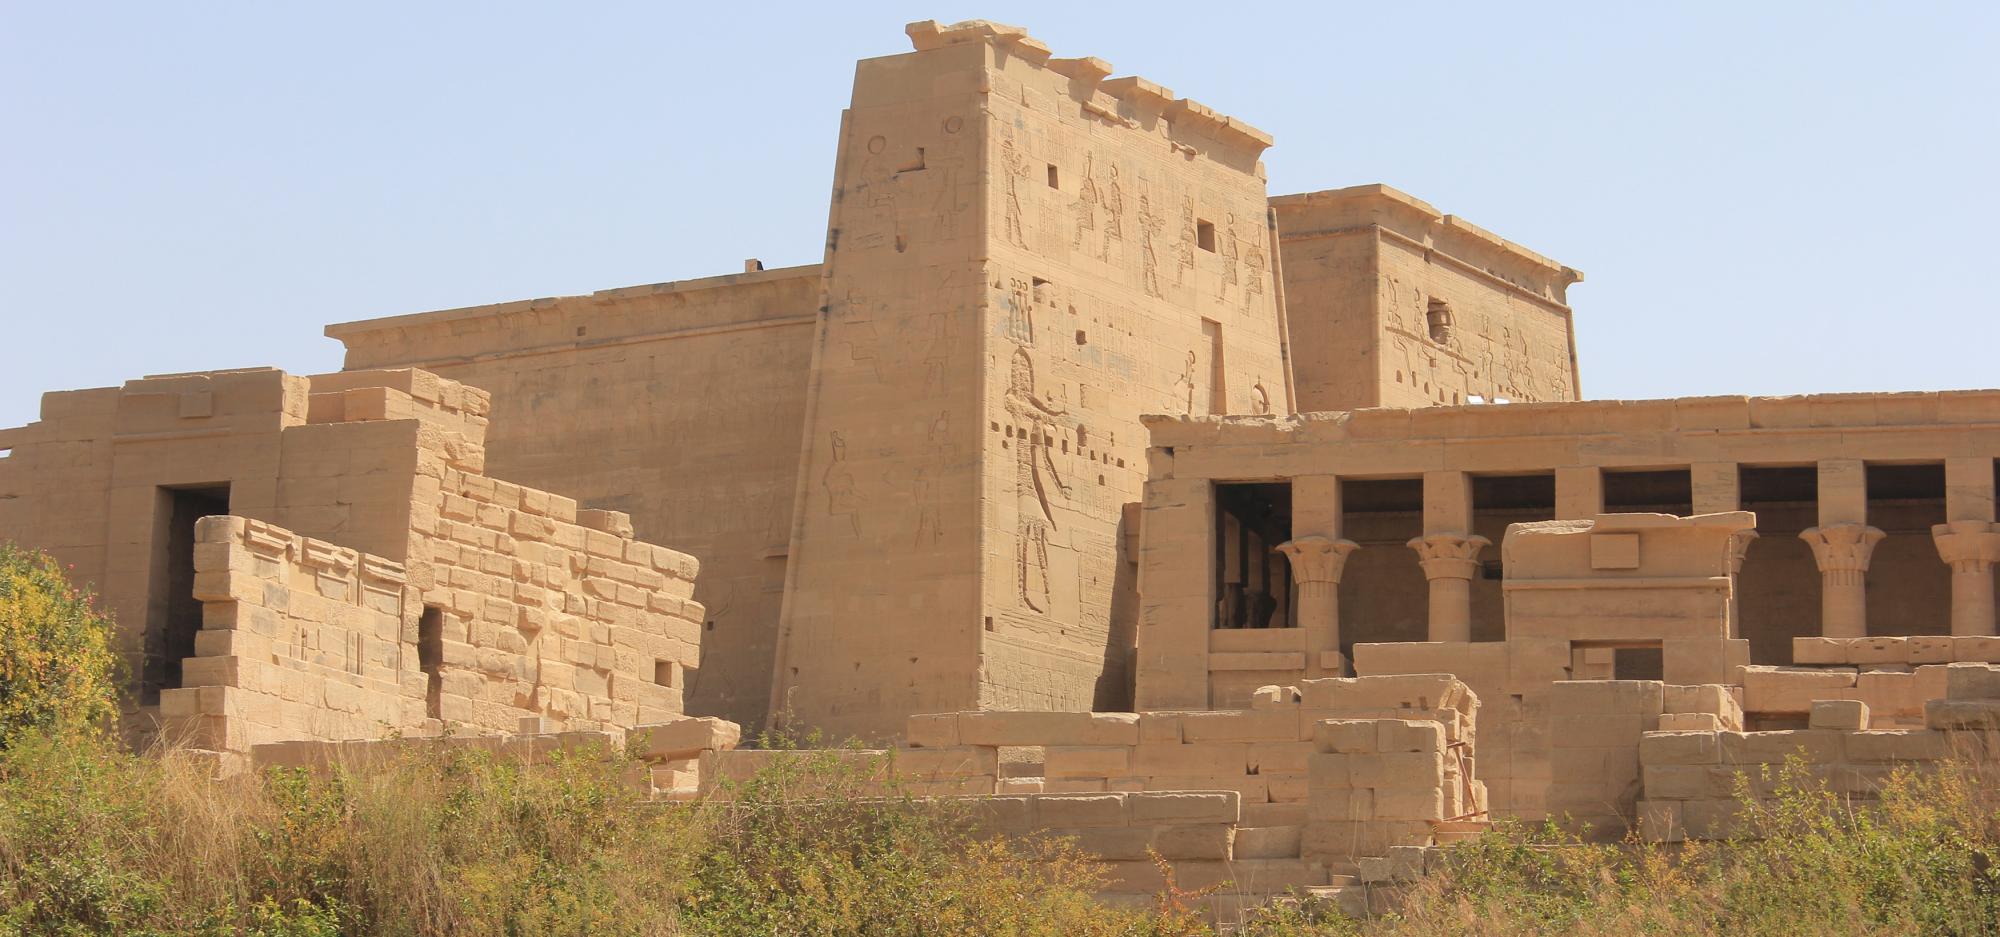 A land sandstone temple positioned in desert-like area with dry green shrubbery stands against a clear blue sky, engraved with large images of people in an Ancient Egyptian style